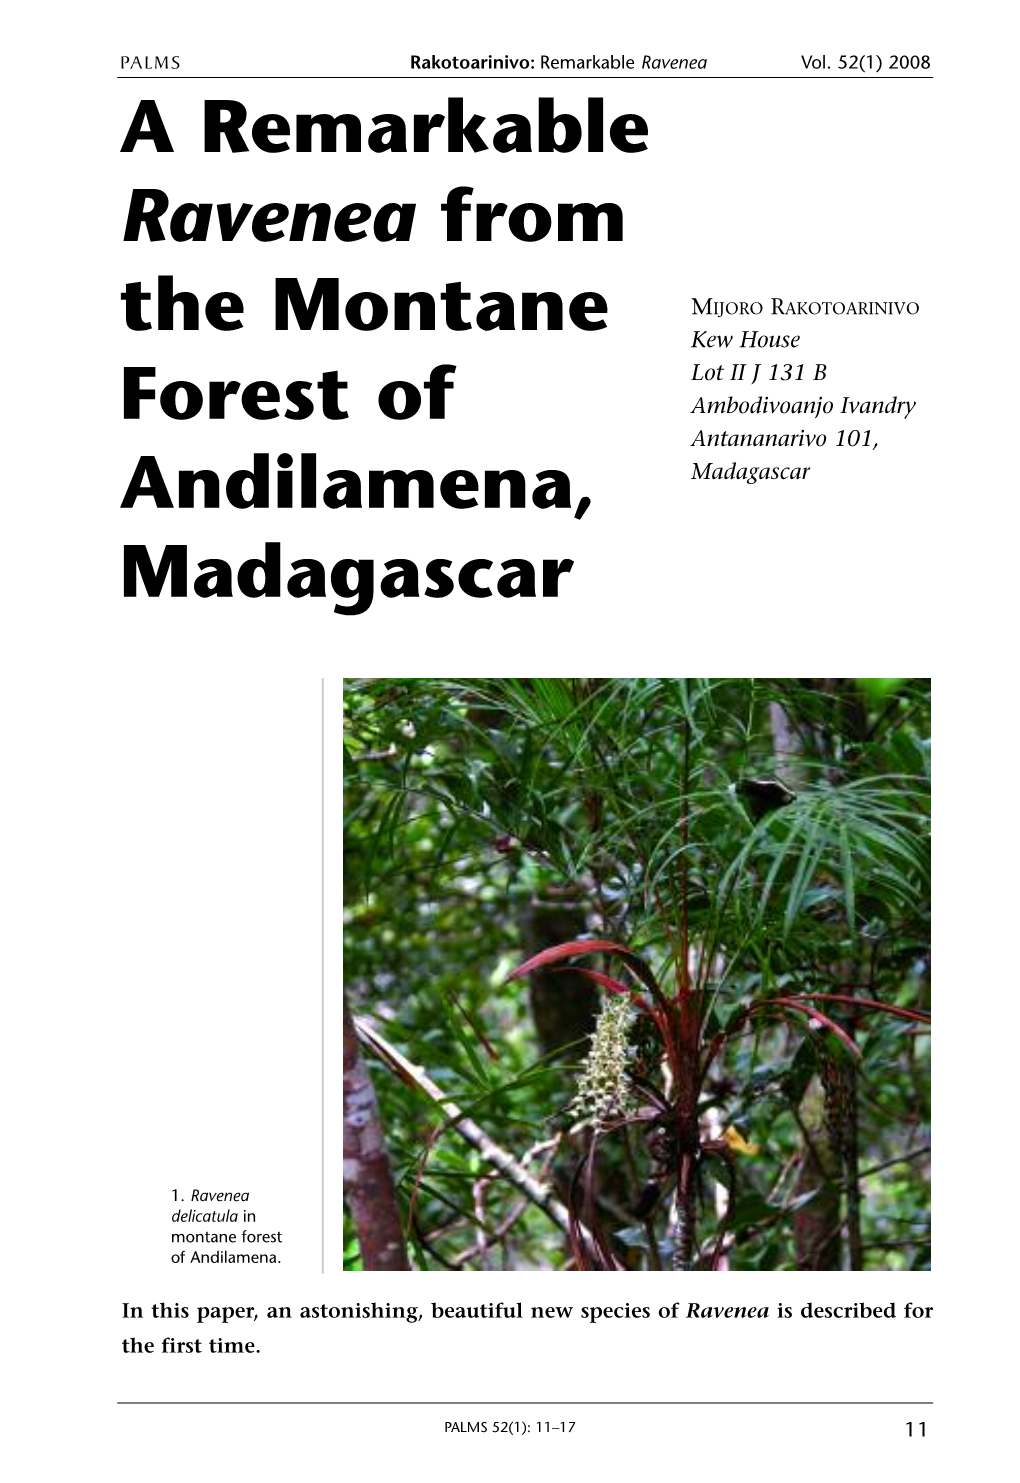 A Remarkable Ravenea from the Montane Forest of Andilamena